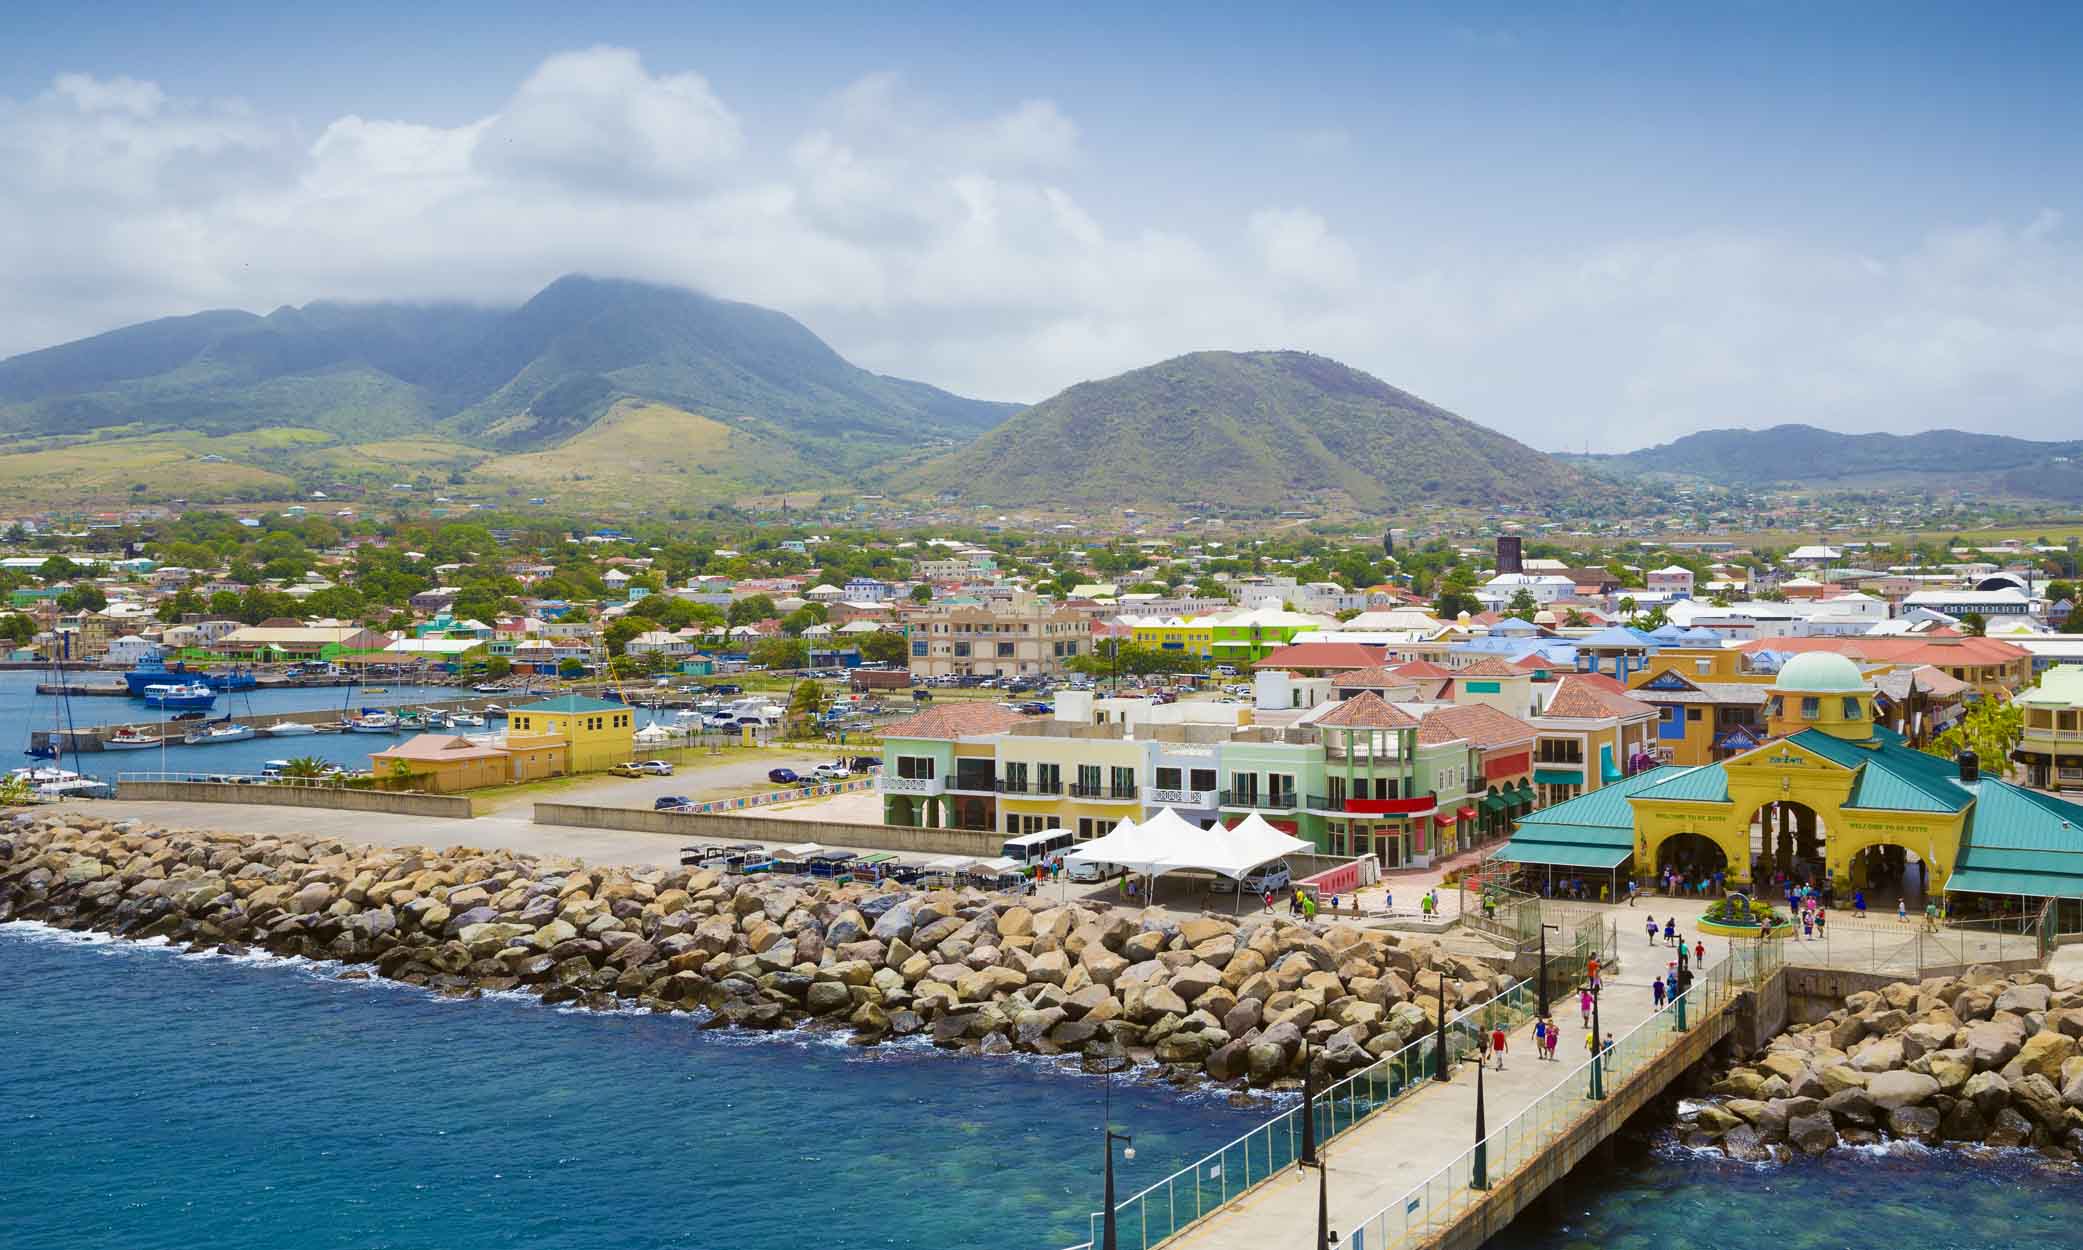 St Kitts and Nevis Citizenship by Investment dates back to 1984.